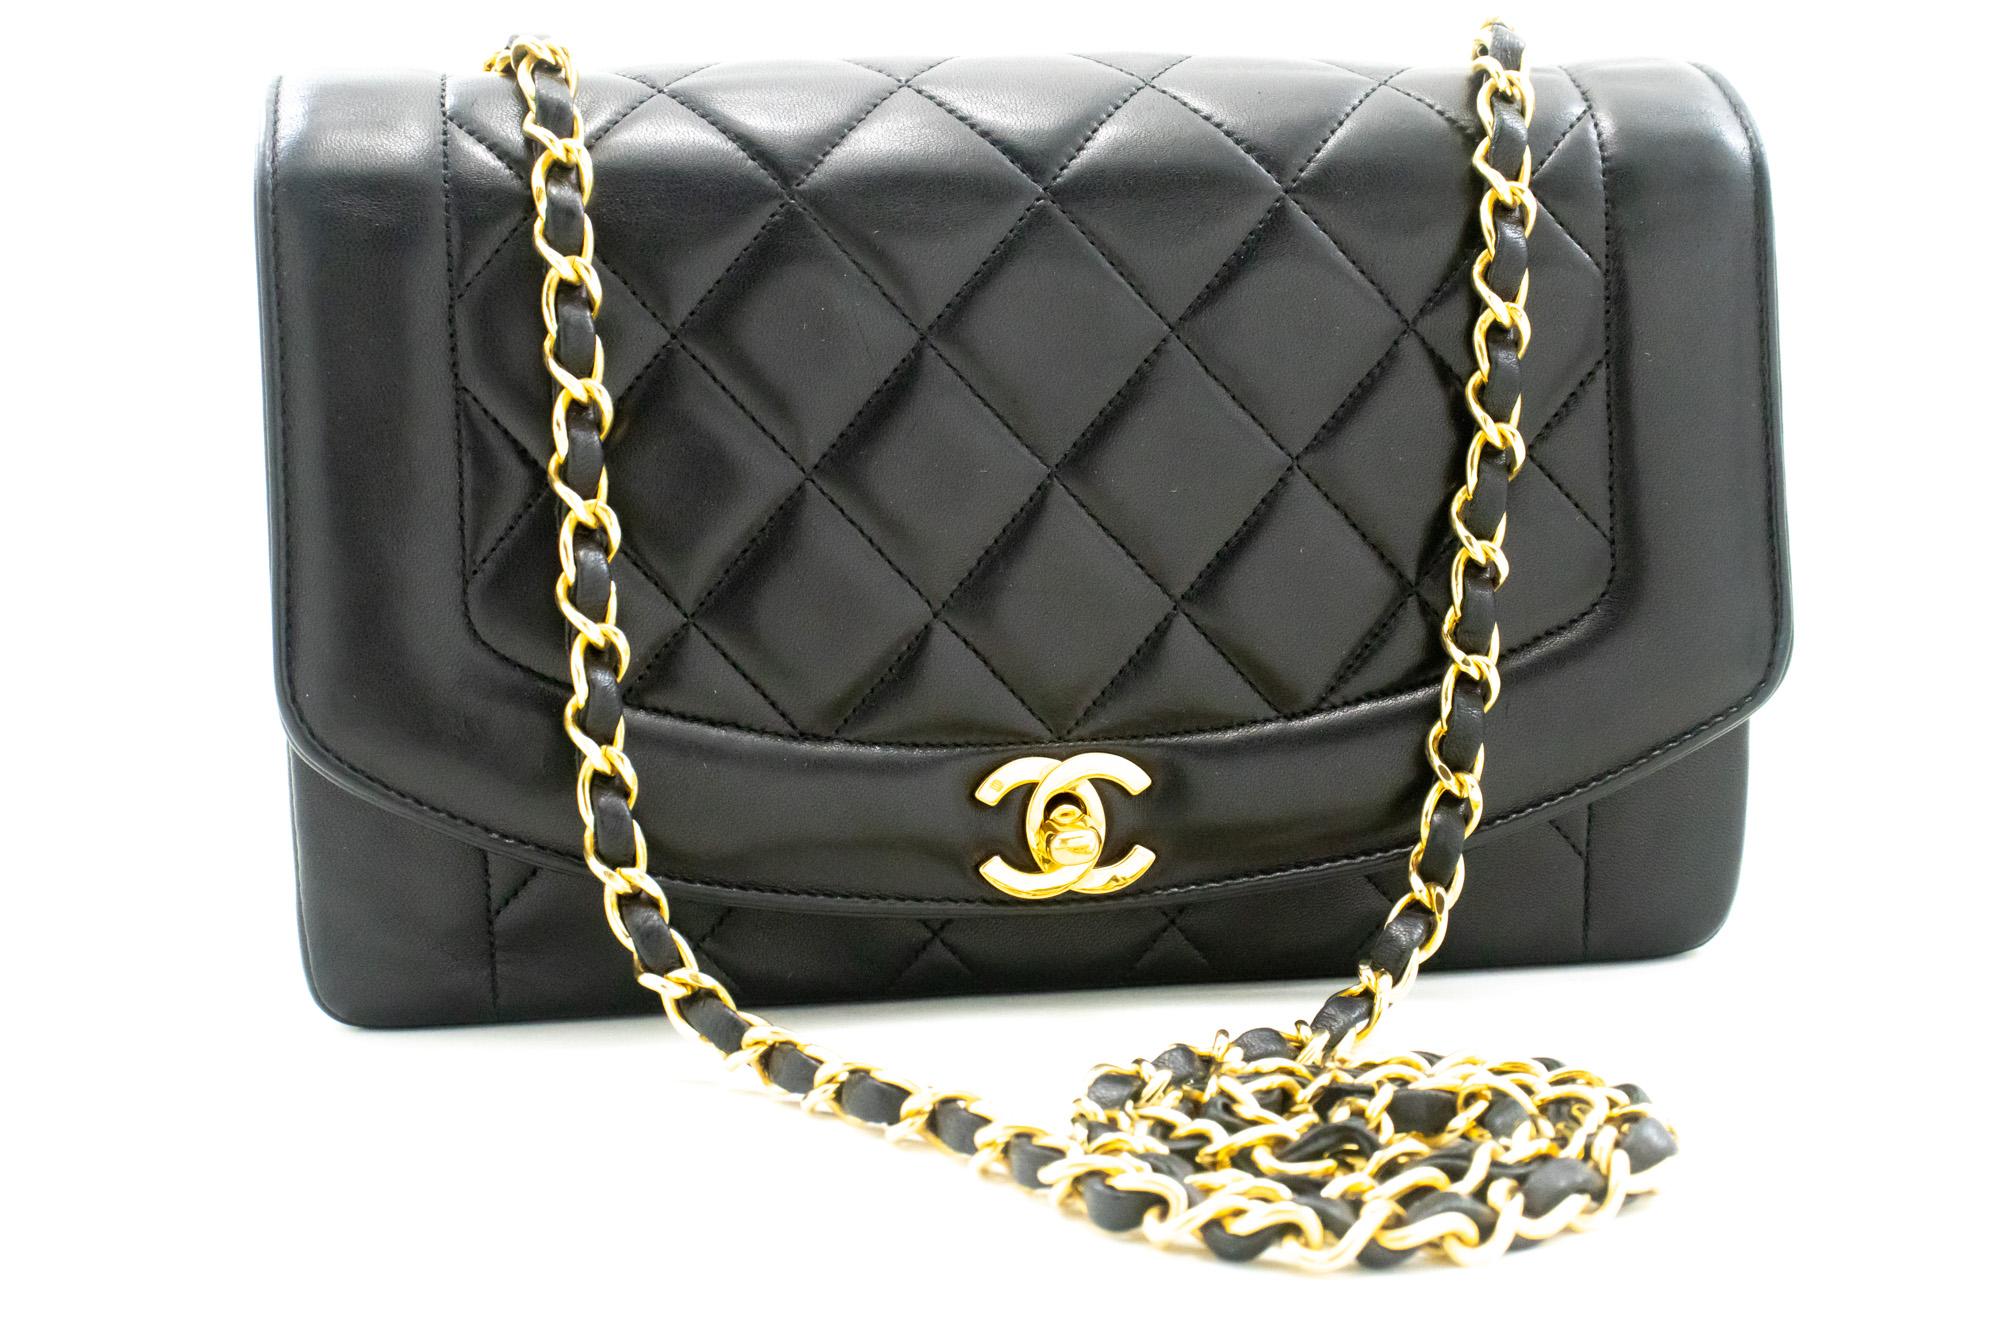 An authentic CHANEL Diana Flap Chain Shoulder Bag Black Quilted made of black Lambskin Purse. The color is Black. The outside material is Leather. The pattern is Solid. This item is Vintage / Classic. The year of manufacture would be